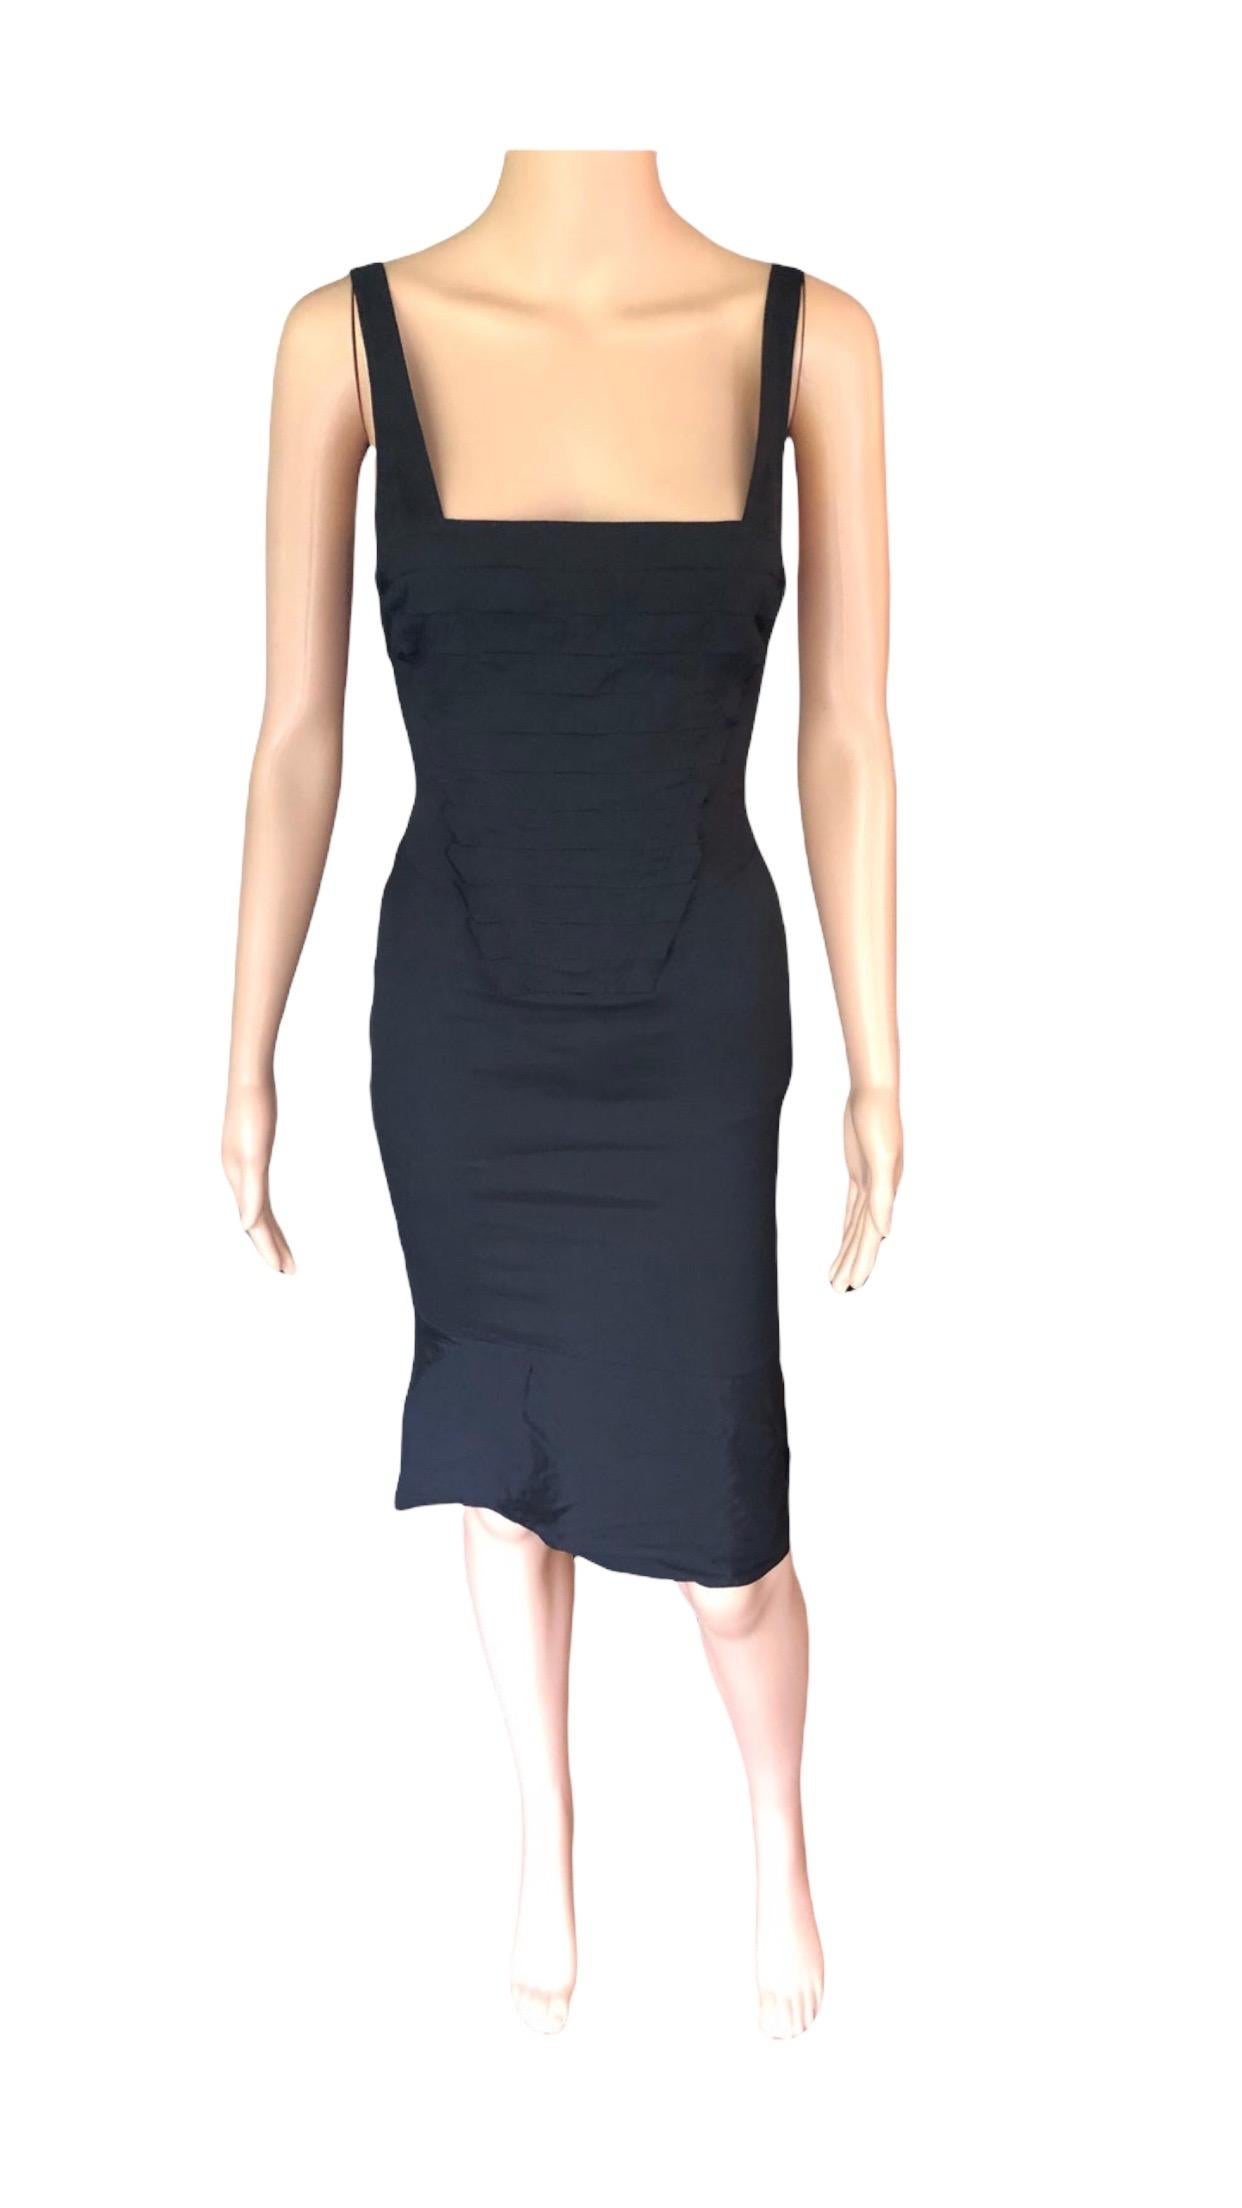 Gucci by Tom Ford S/S 2004 Cutout Black Dress For Sale 5